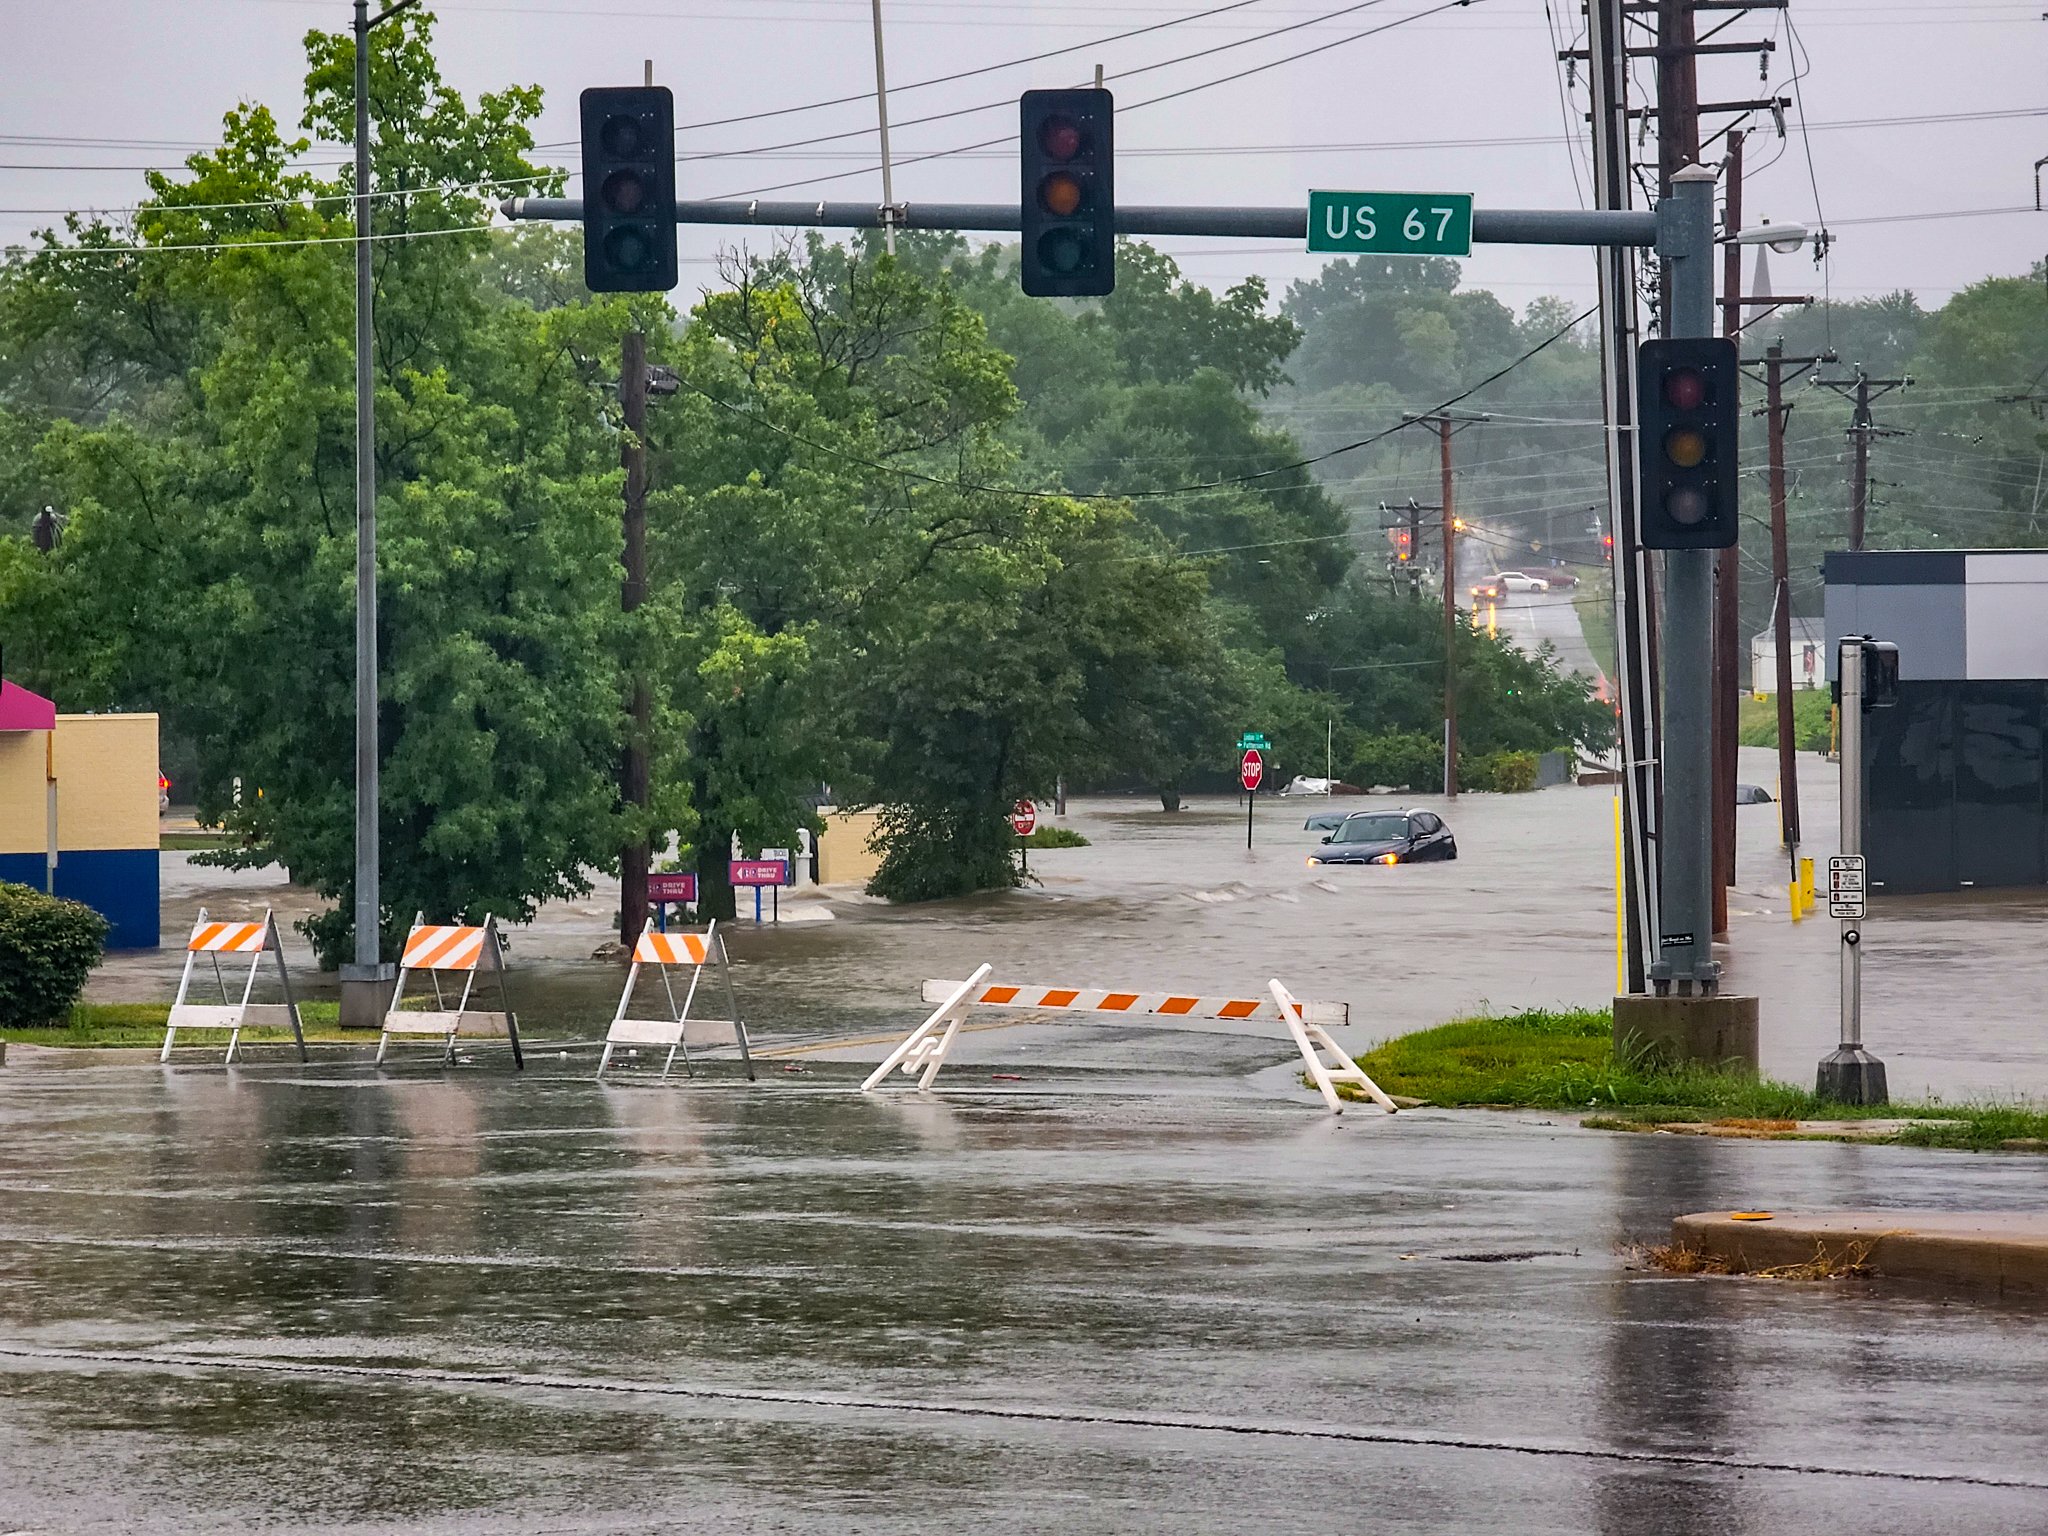 Flooding at Lindbergh Blvd. and St. Denis Street in Florissant, MO.